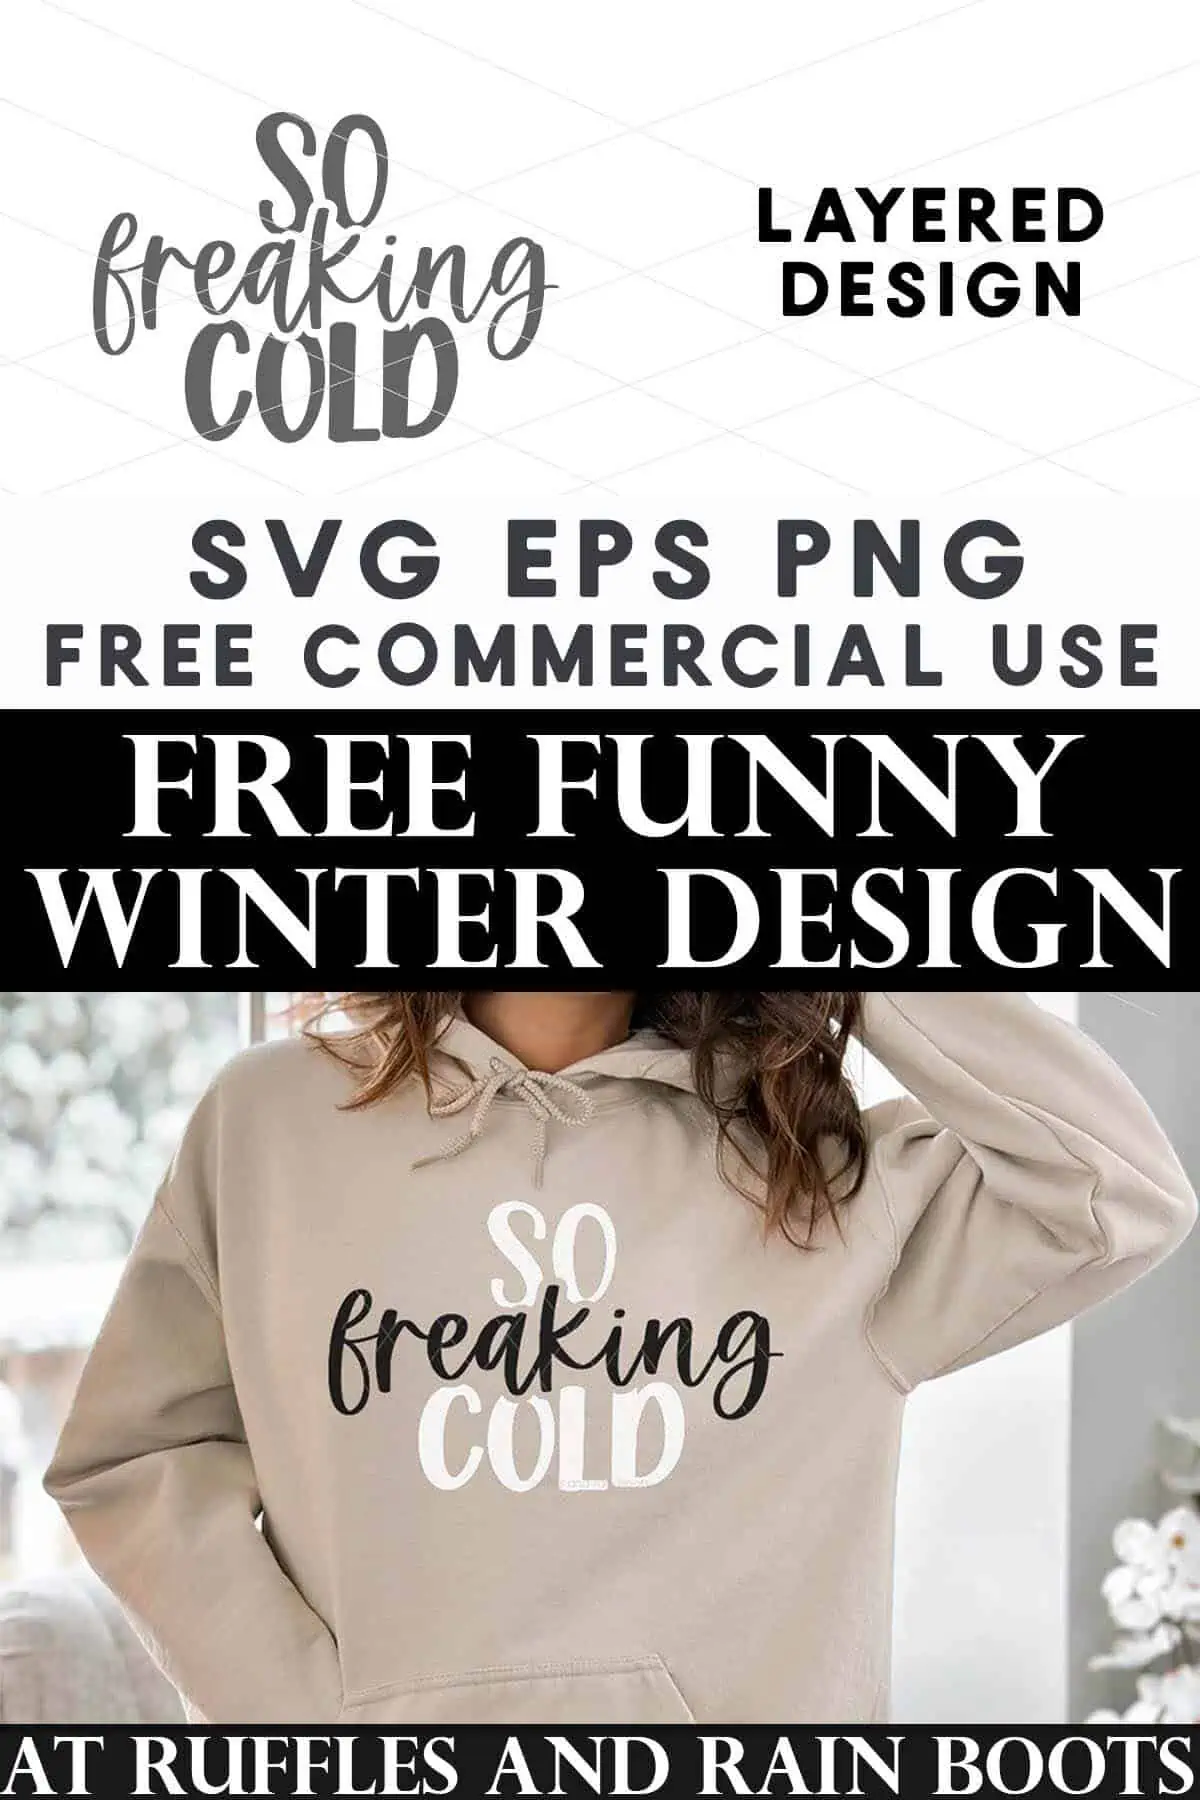 Split vertical image of woman in tan sweatshirt which reads so freaking cold and text which reads free funny winter SVG.